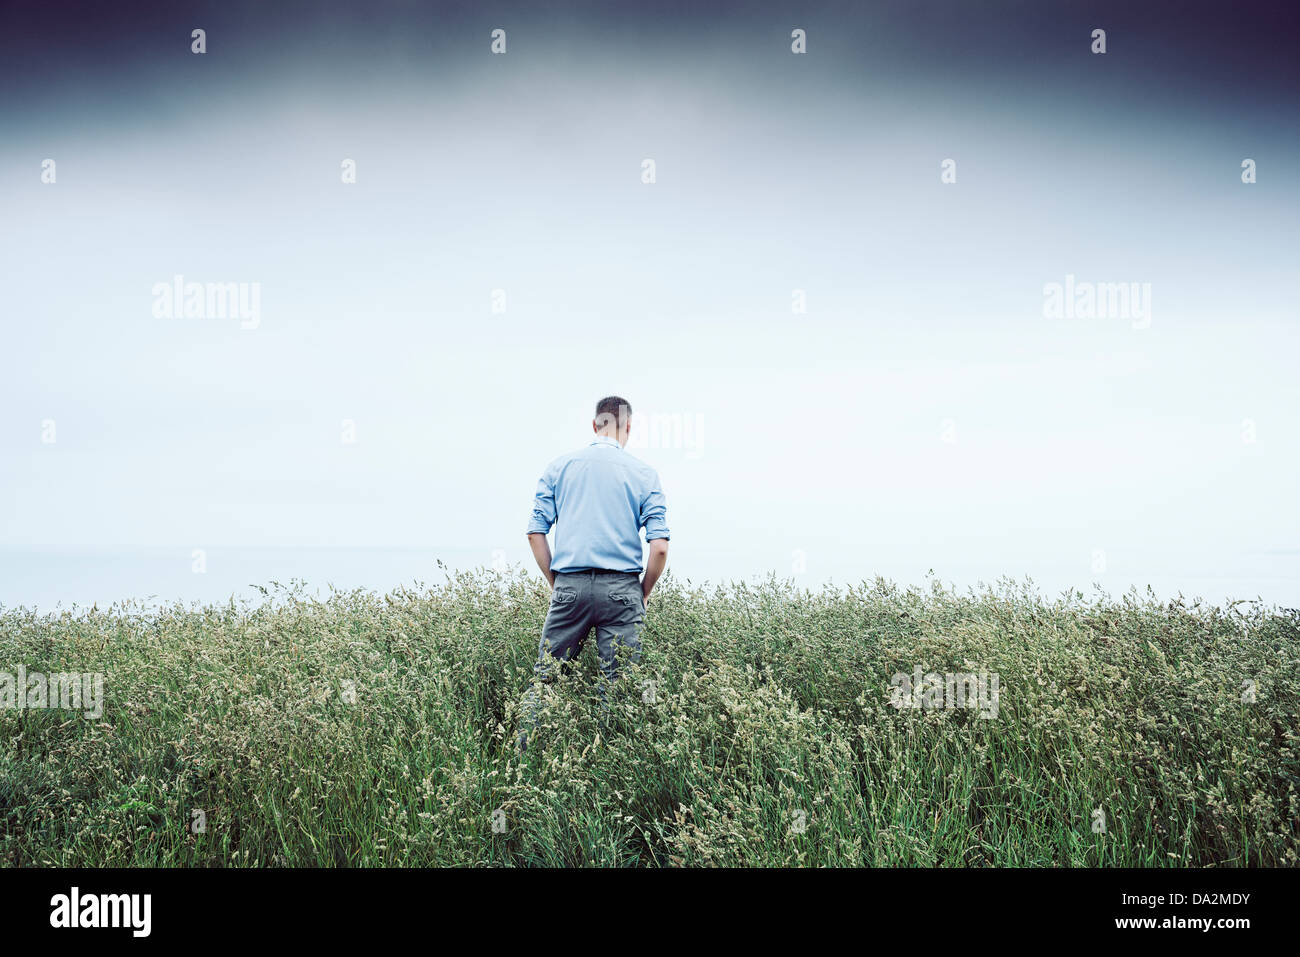 Man in casual dress standing with hands in his pockets in long grasses on a cliff in Newquay Corwall, looks out to sea, thinking Stock Photo